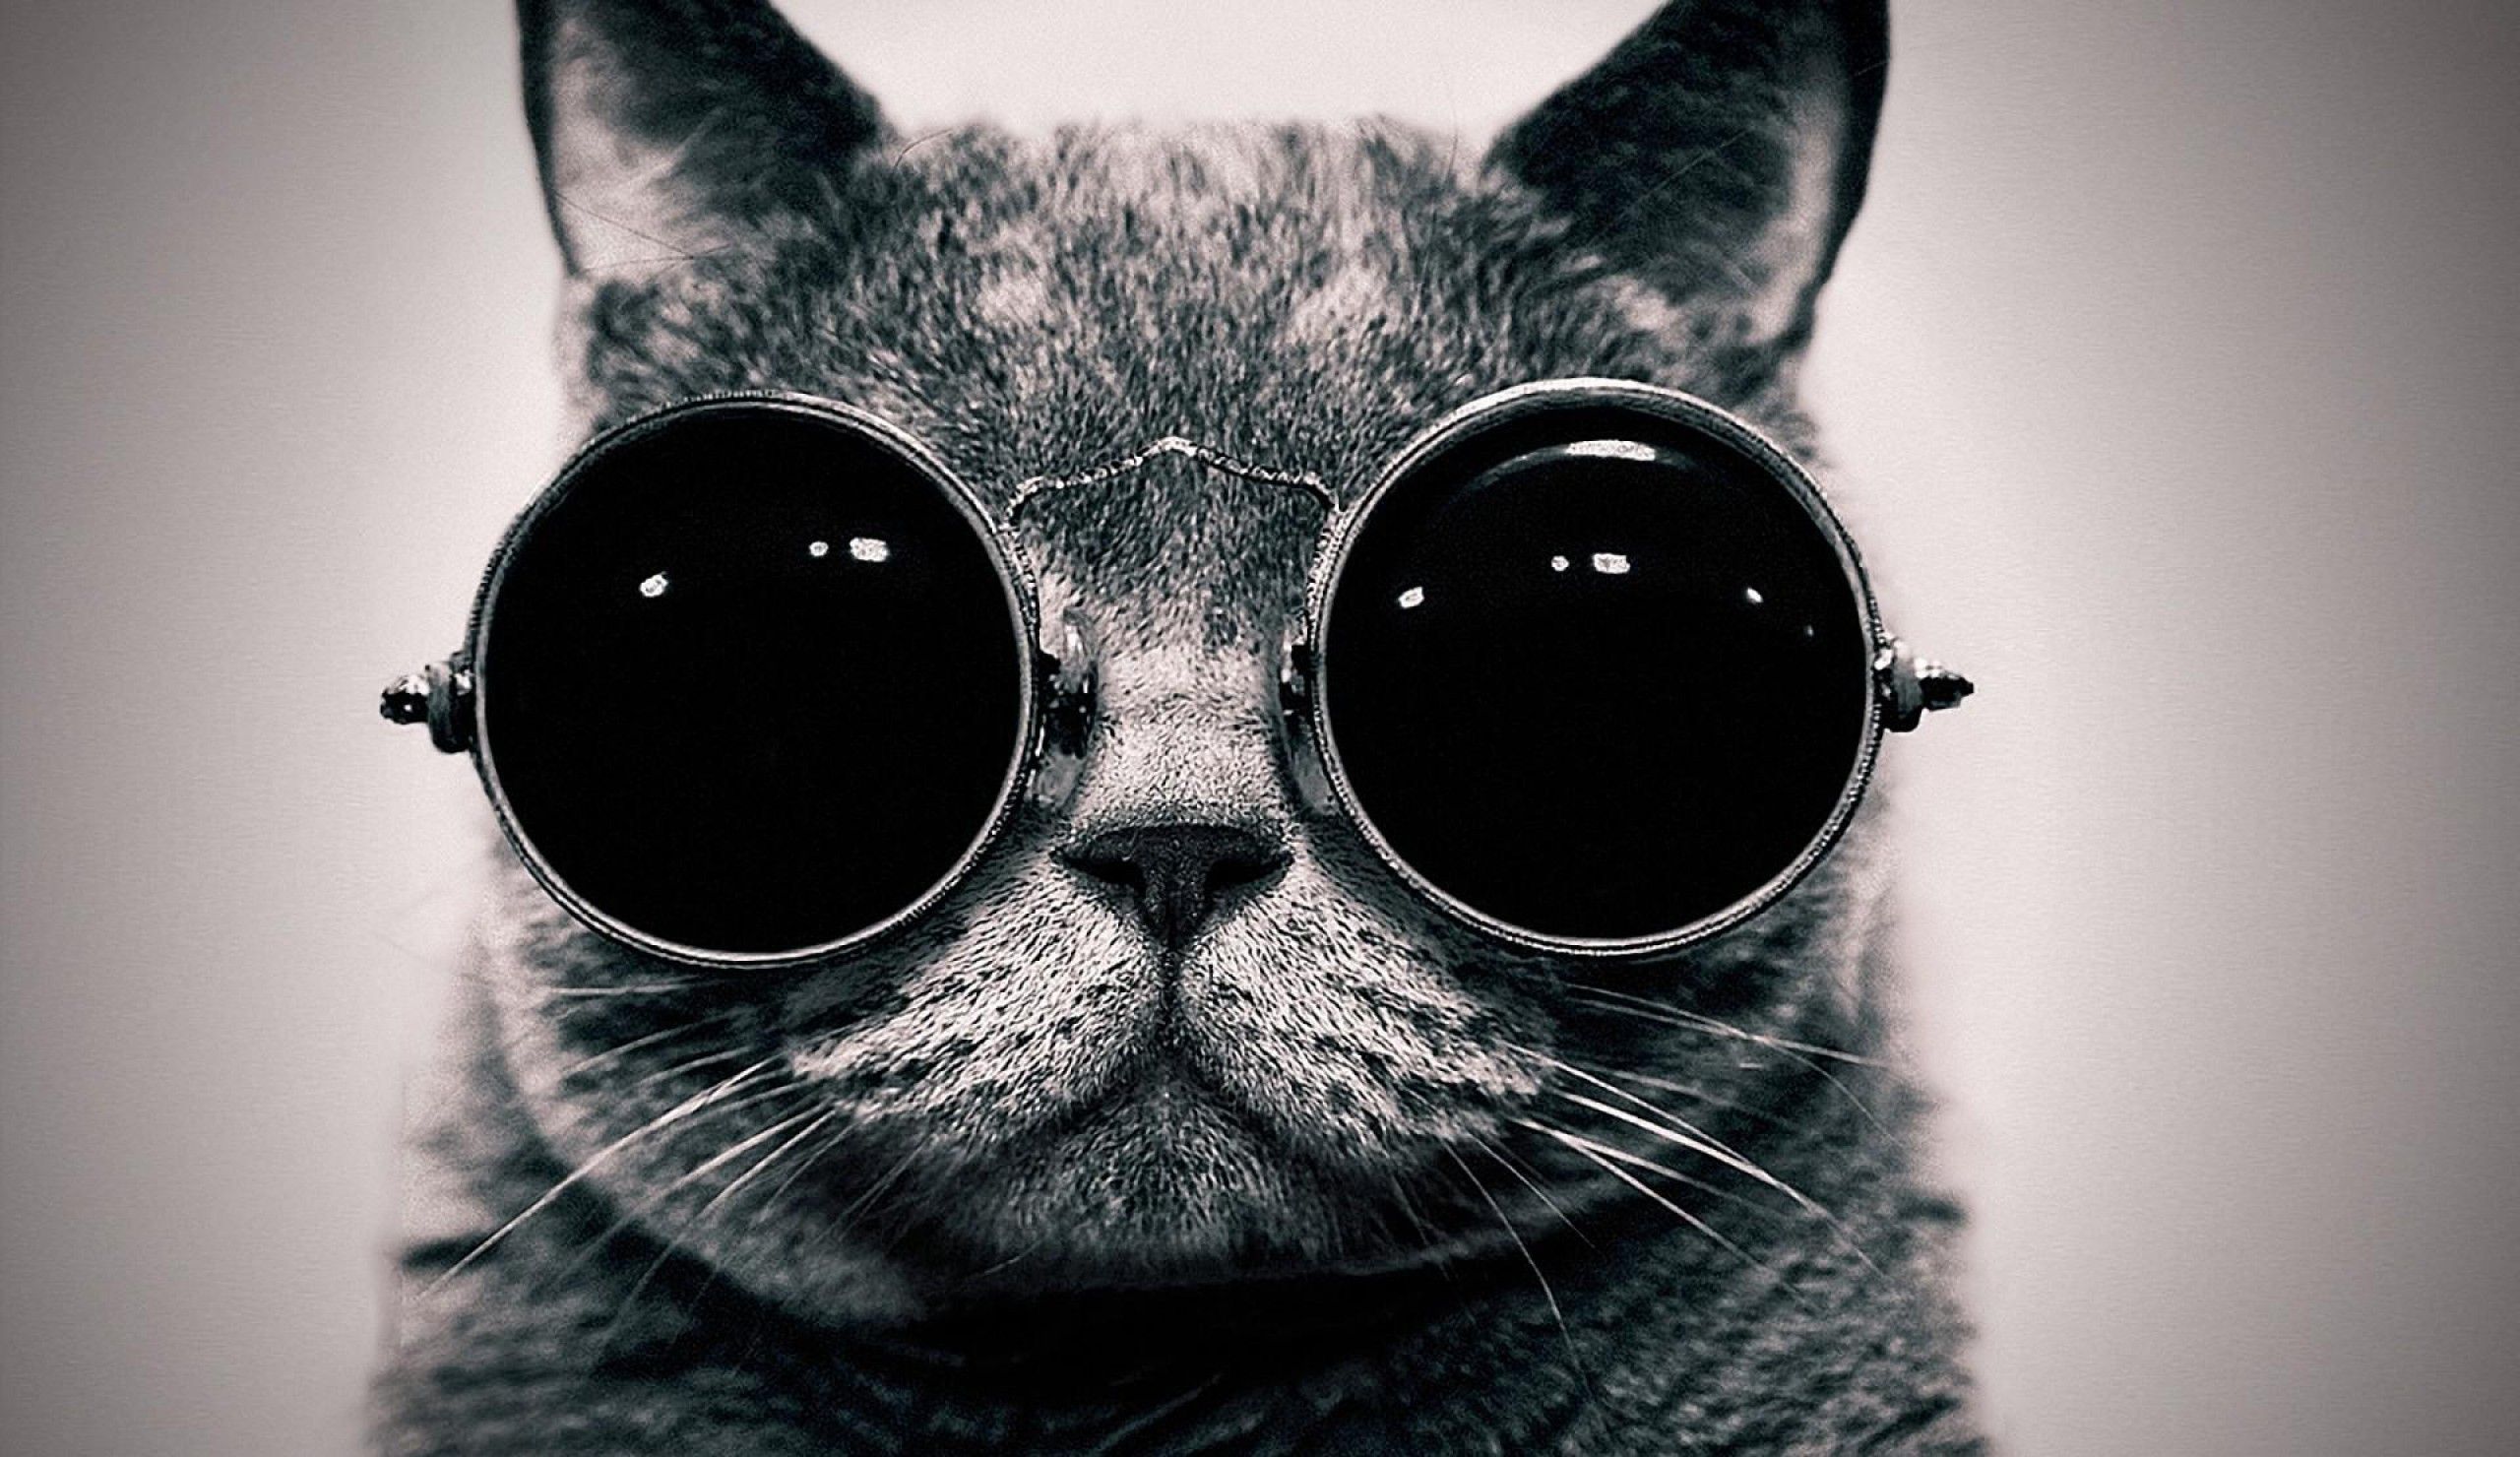 A cat-person's guide to finding glasses that fit your cat | For Little Eyes